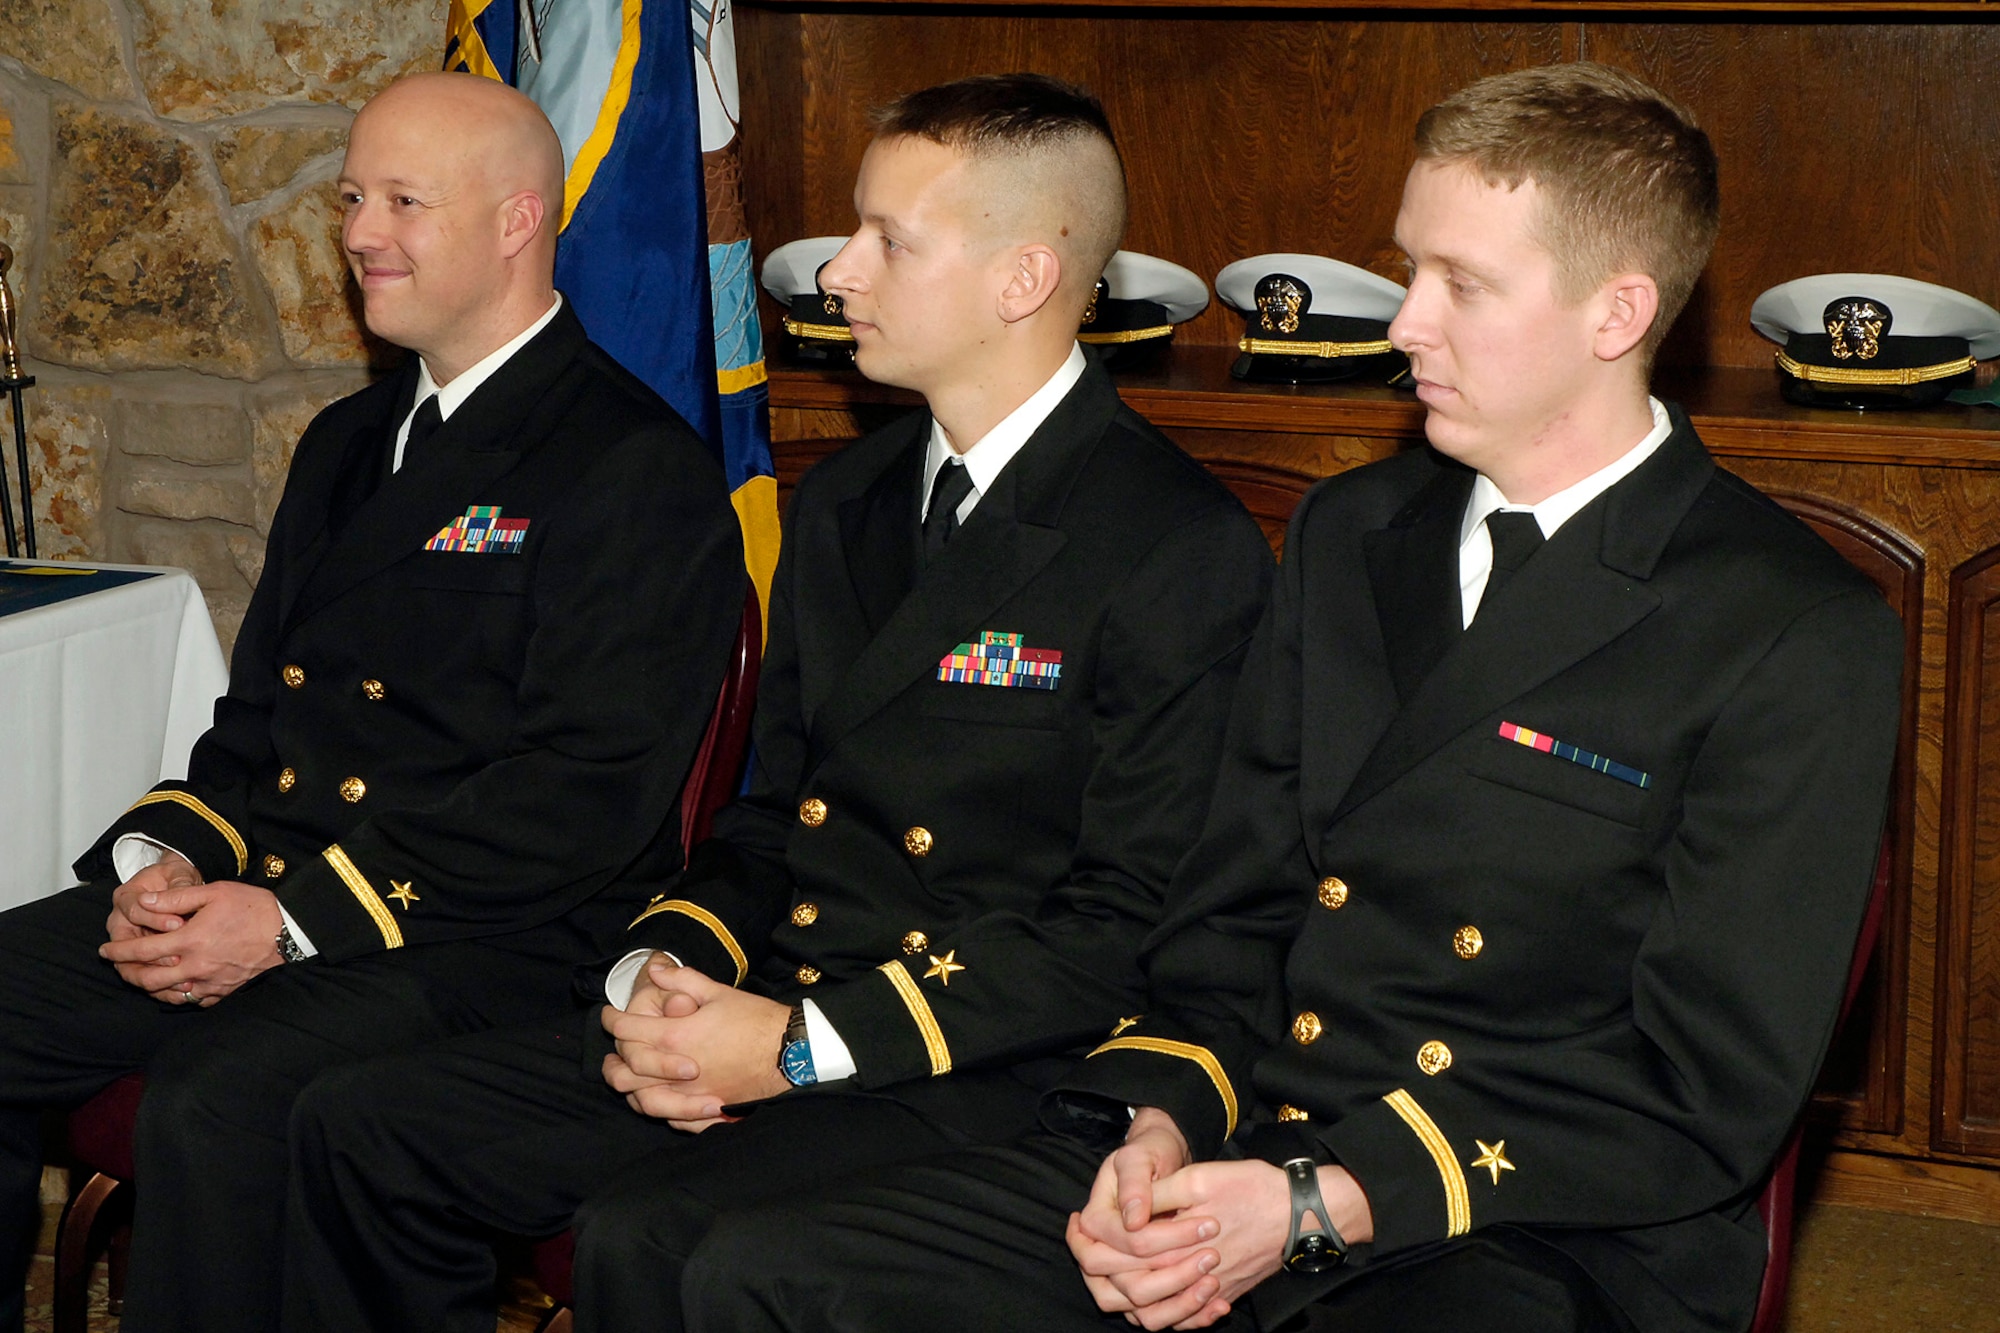 Naval Flight Officer Class N08-03 officially received their flight officer status and gold NFO wings at a recent ceremony held at the Tinker Club. The Navy’s newest Aviators, from left, are Ensign Joseph Ballard, Ensign Bradley J. La Fontaine and Ensign Colin Raunig. (Navy photo)